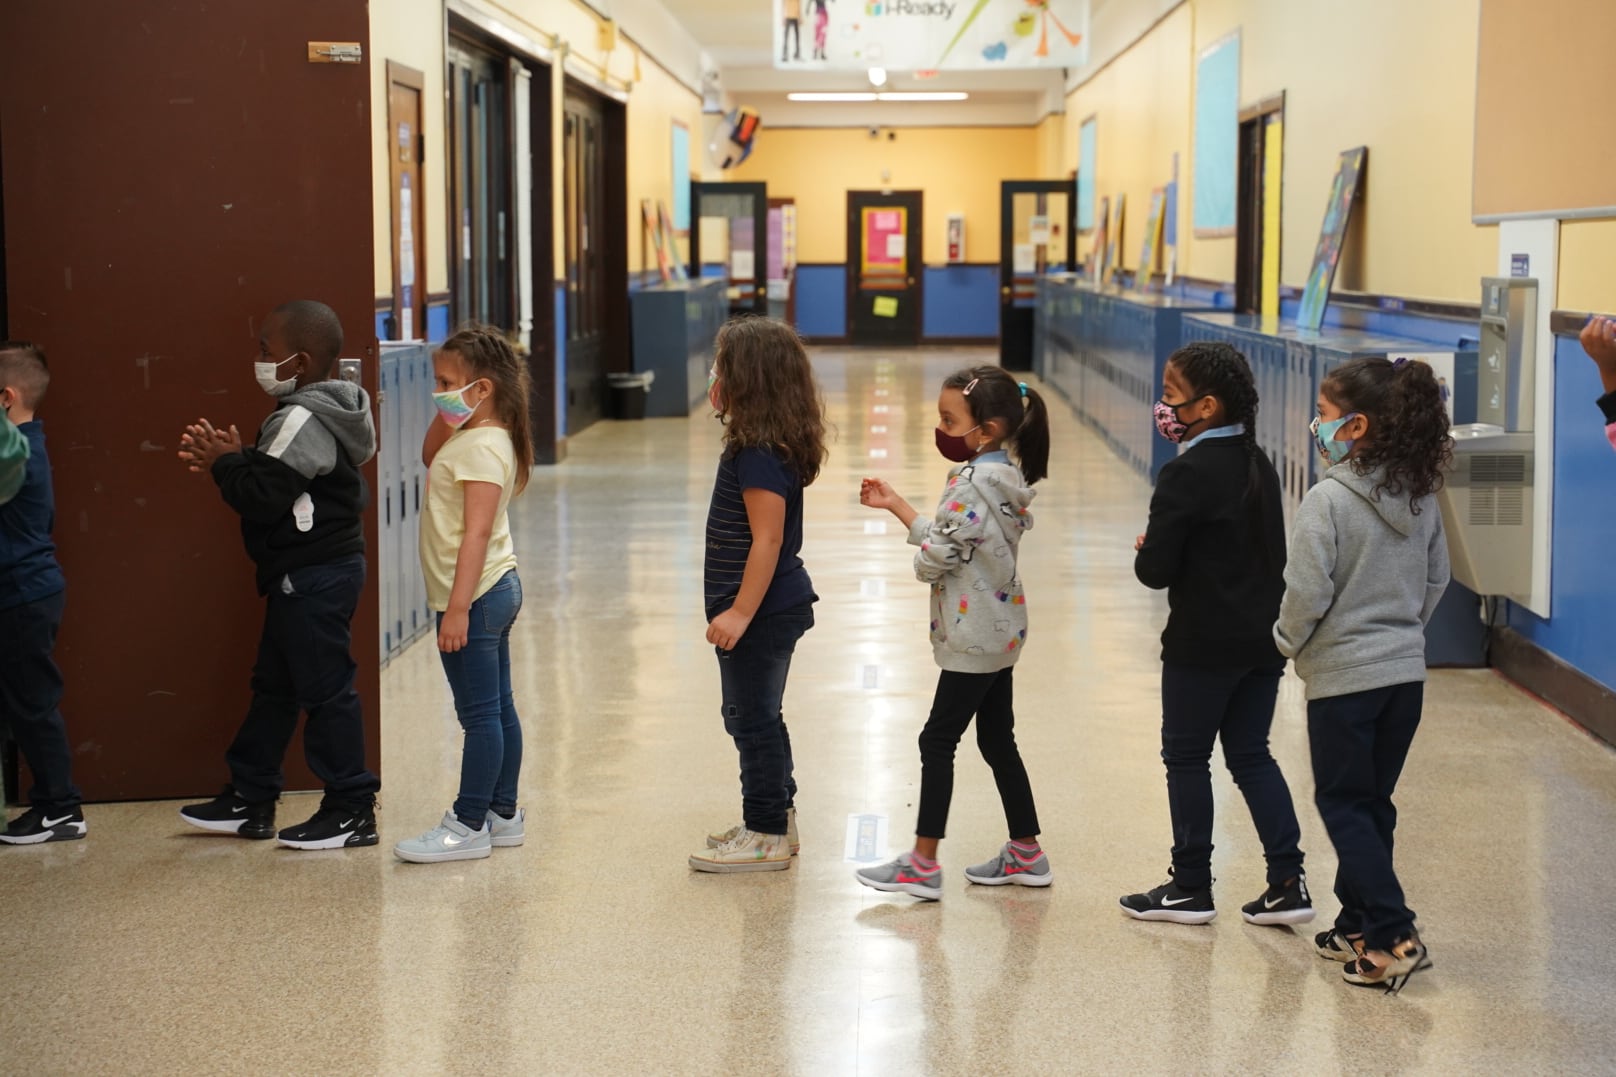 Students at a Detroit elementary school line up as they walk through the hallways.